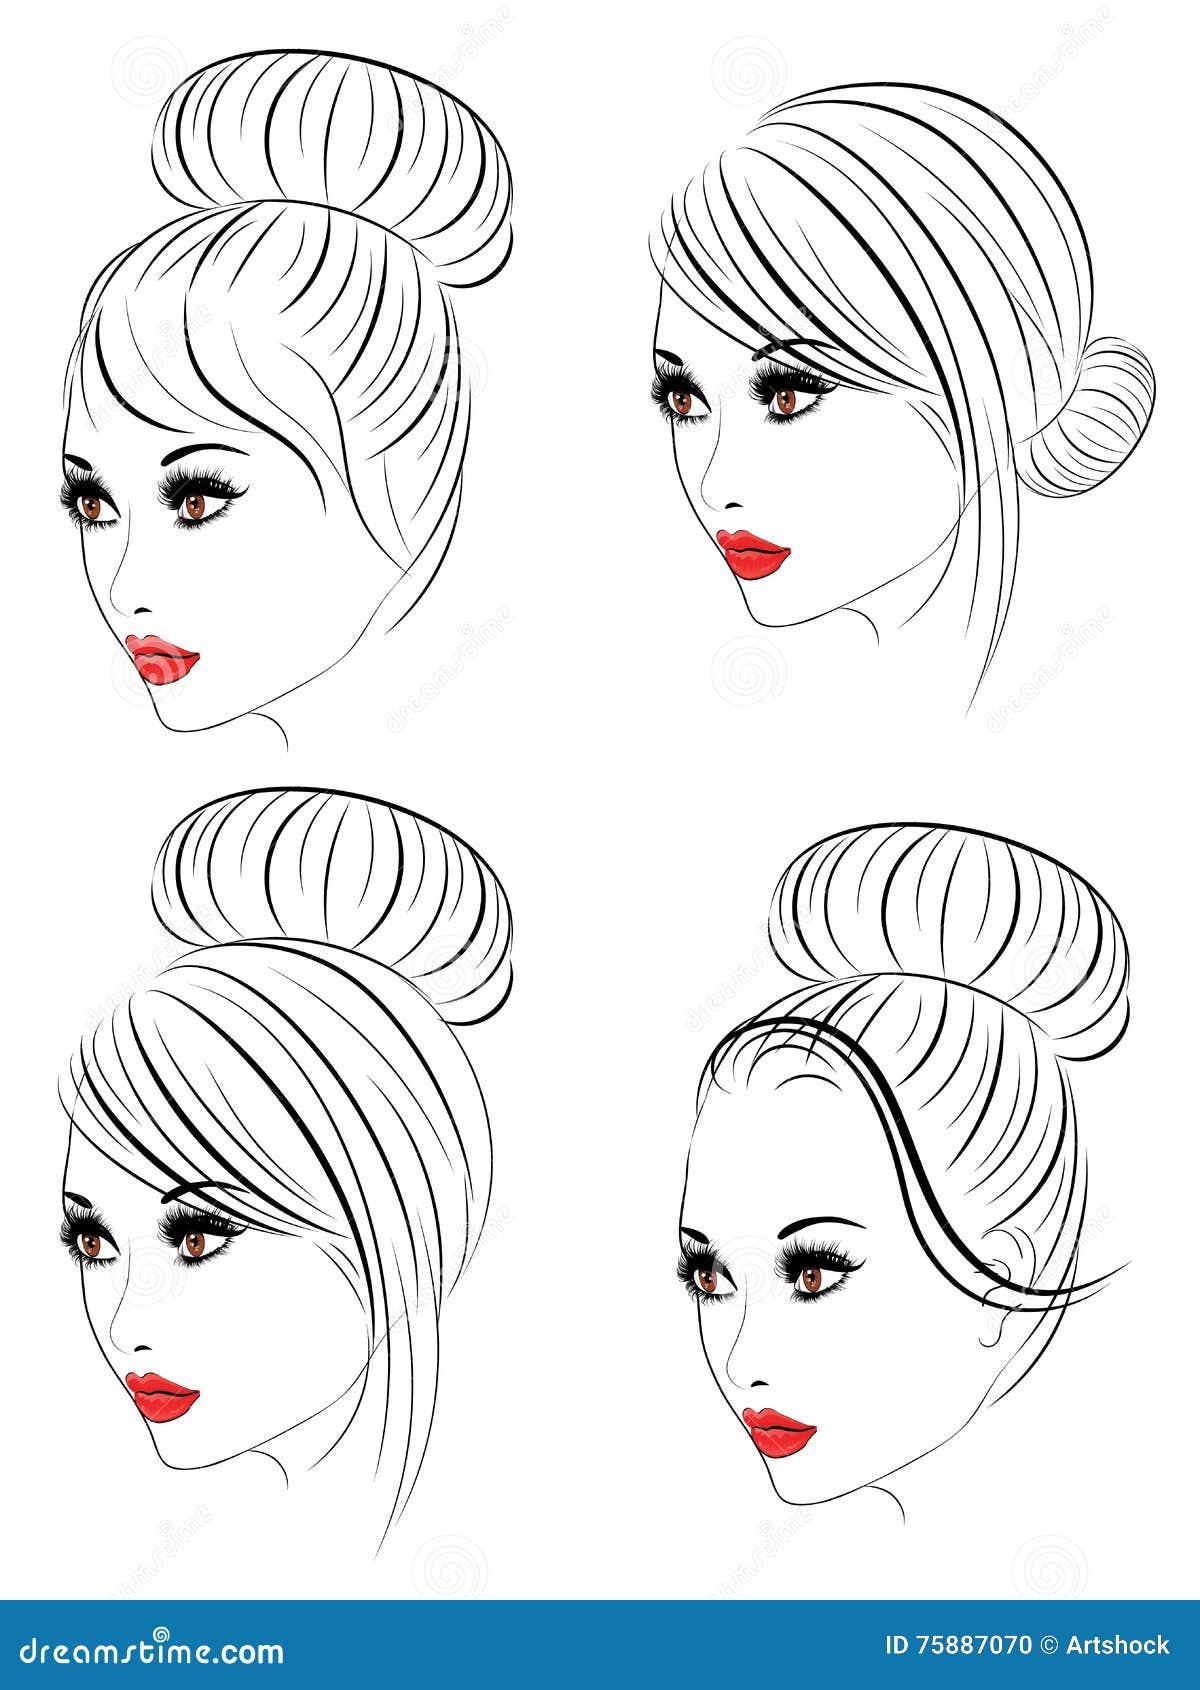 Fashion Hairstyles Lineart stock vector. Illustration of hair - 75887070